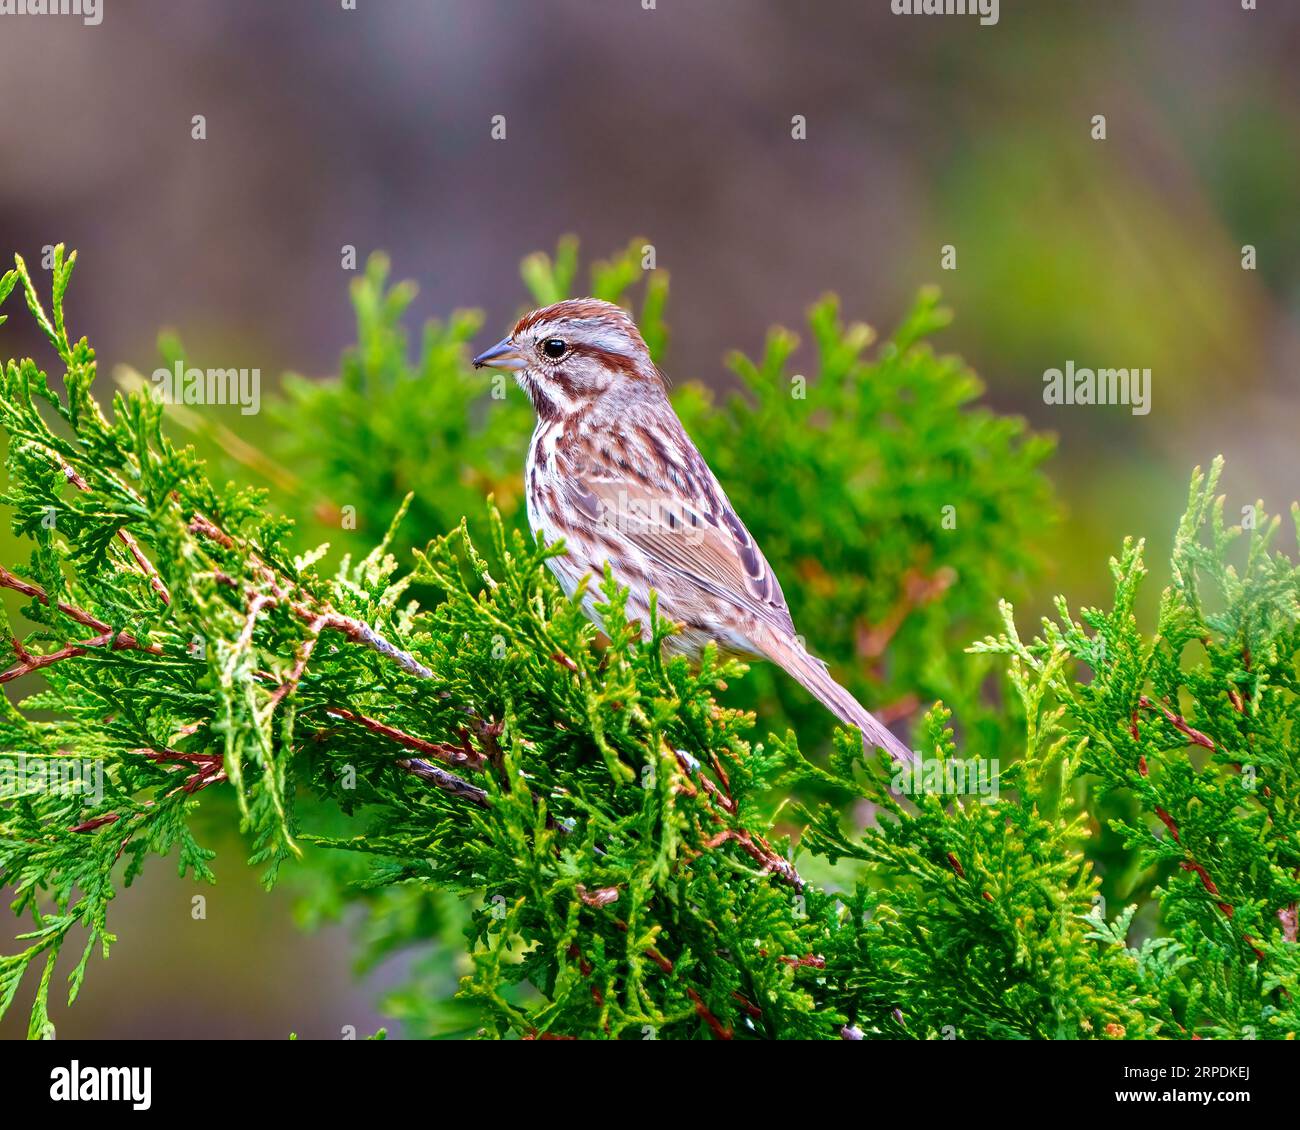 Sparrow close up side view perched on a cedar branch tree with a blur background in its environment and habitat surrounding. Stock Photo